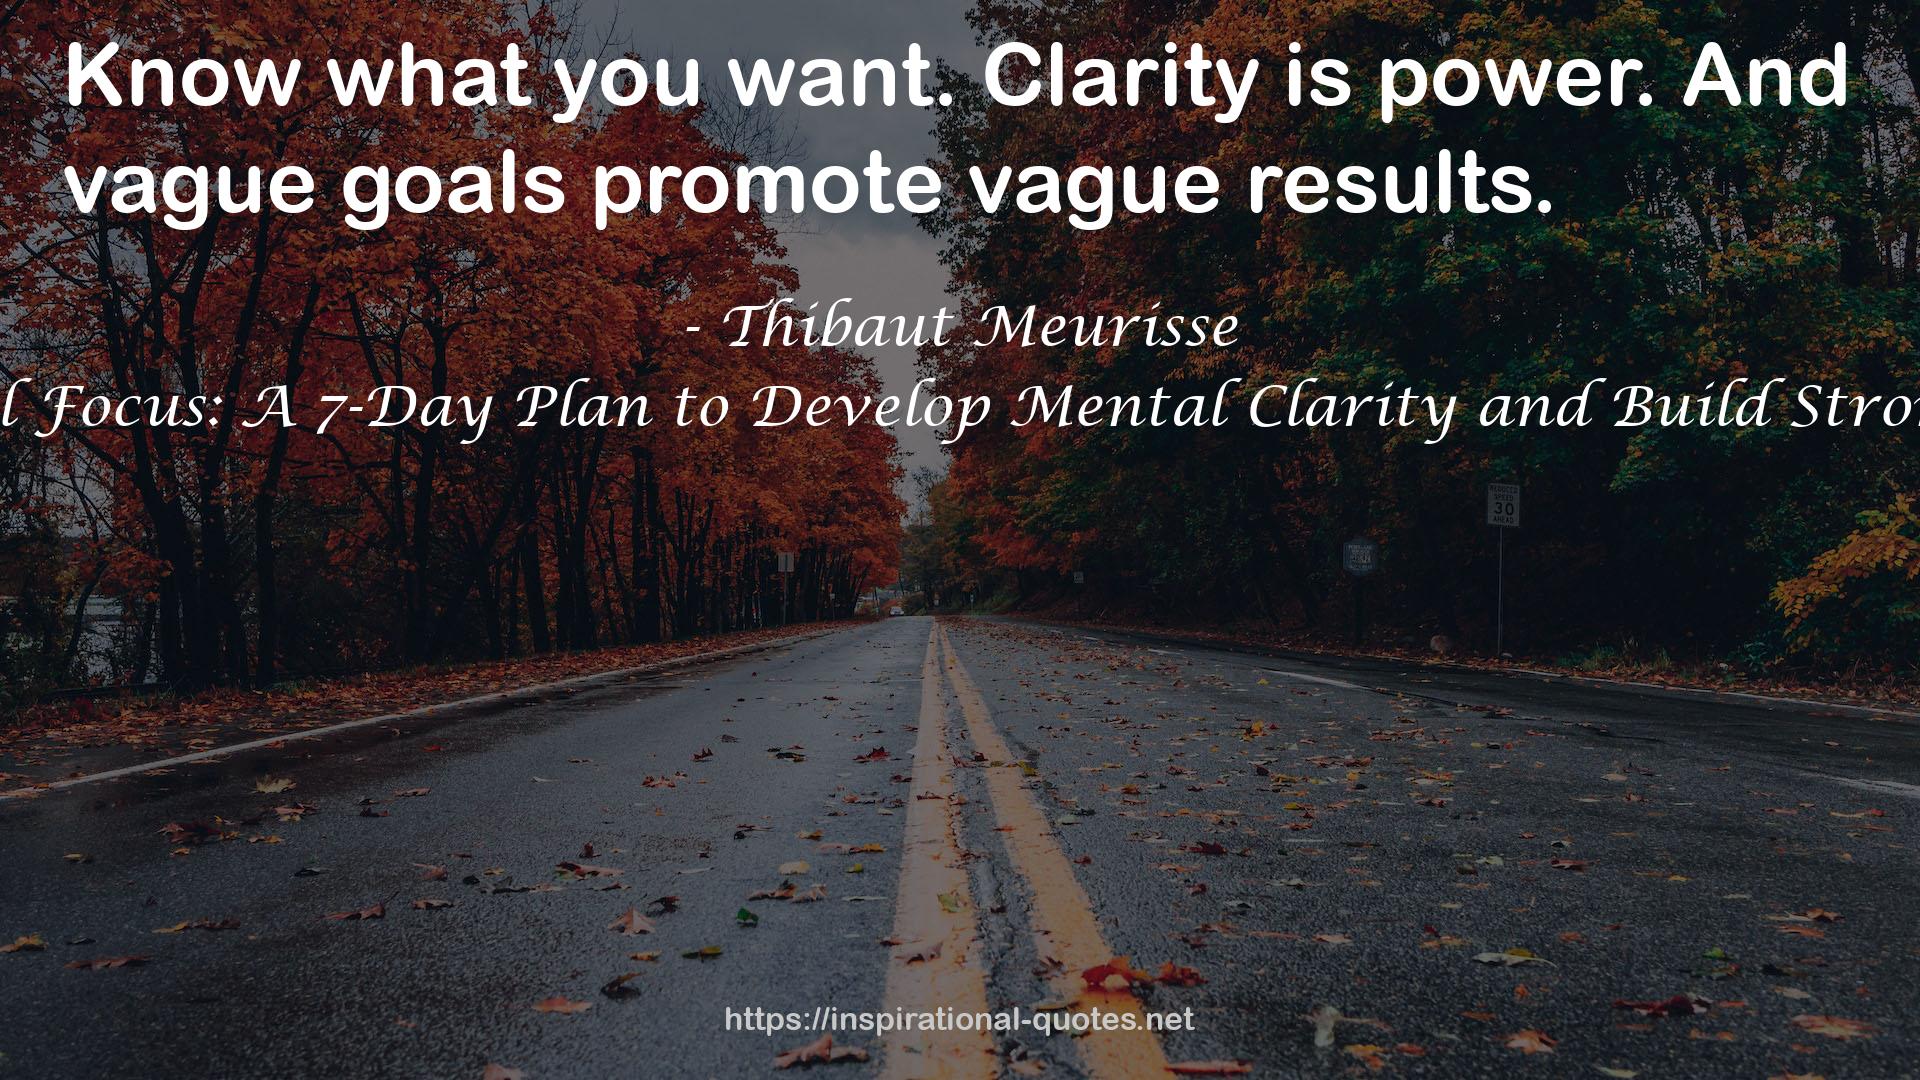 Powerful Focus: A 7-Day Plan to Develop Mental Clarity and Build Strong Focus QUOTES